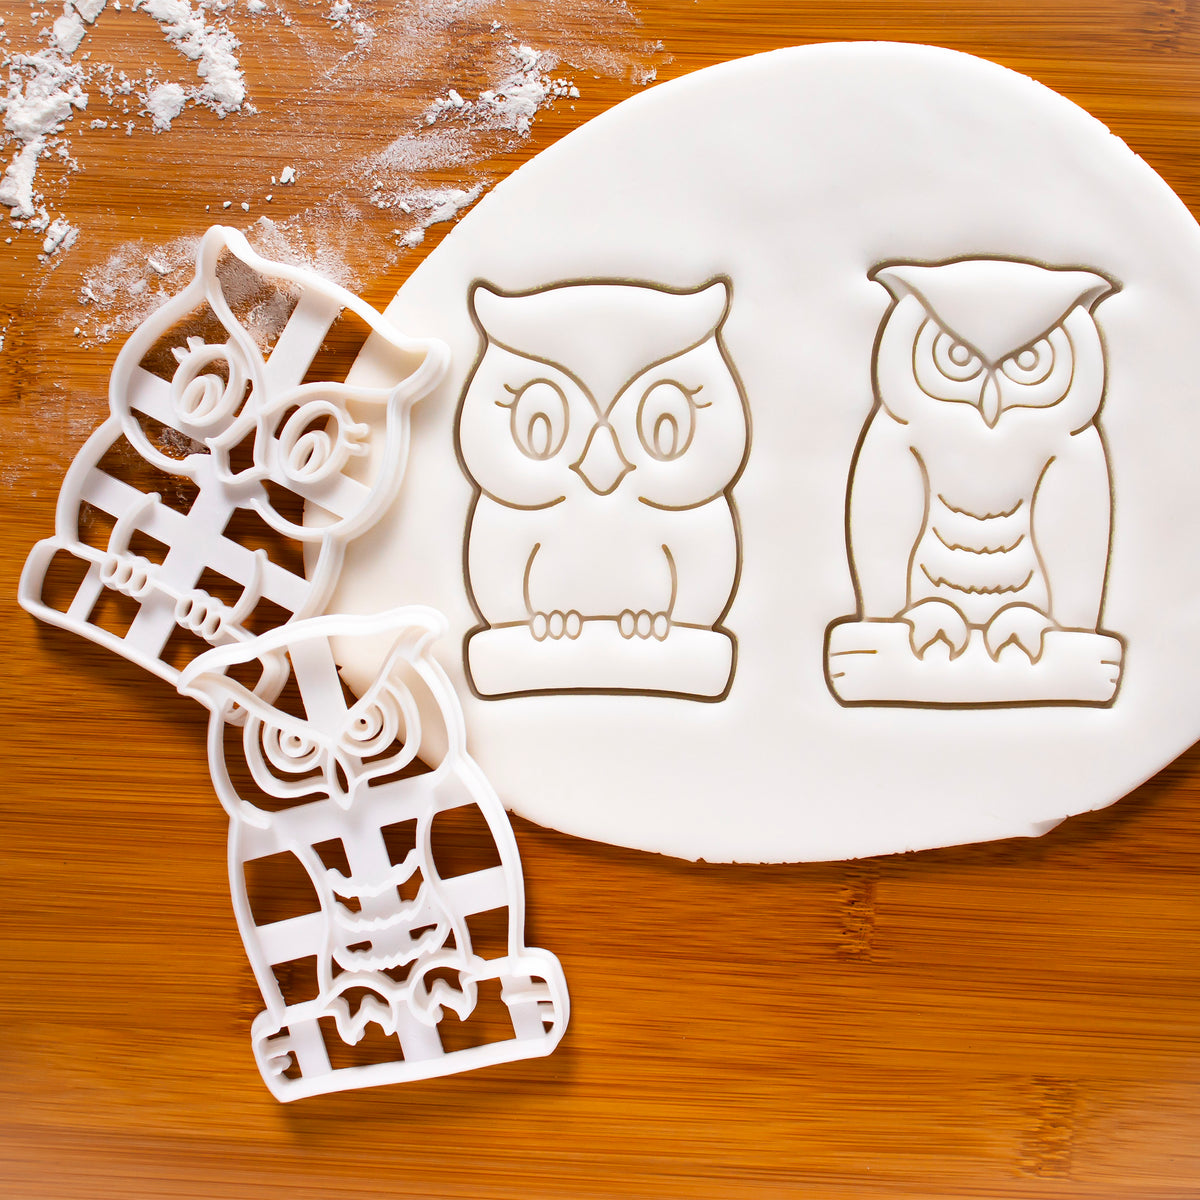 set of 2 owl cookie cutters, great horned owl and cute owl